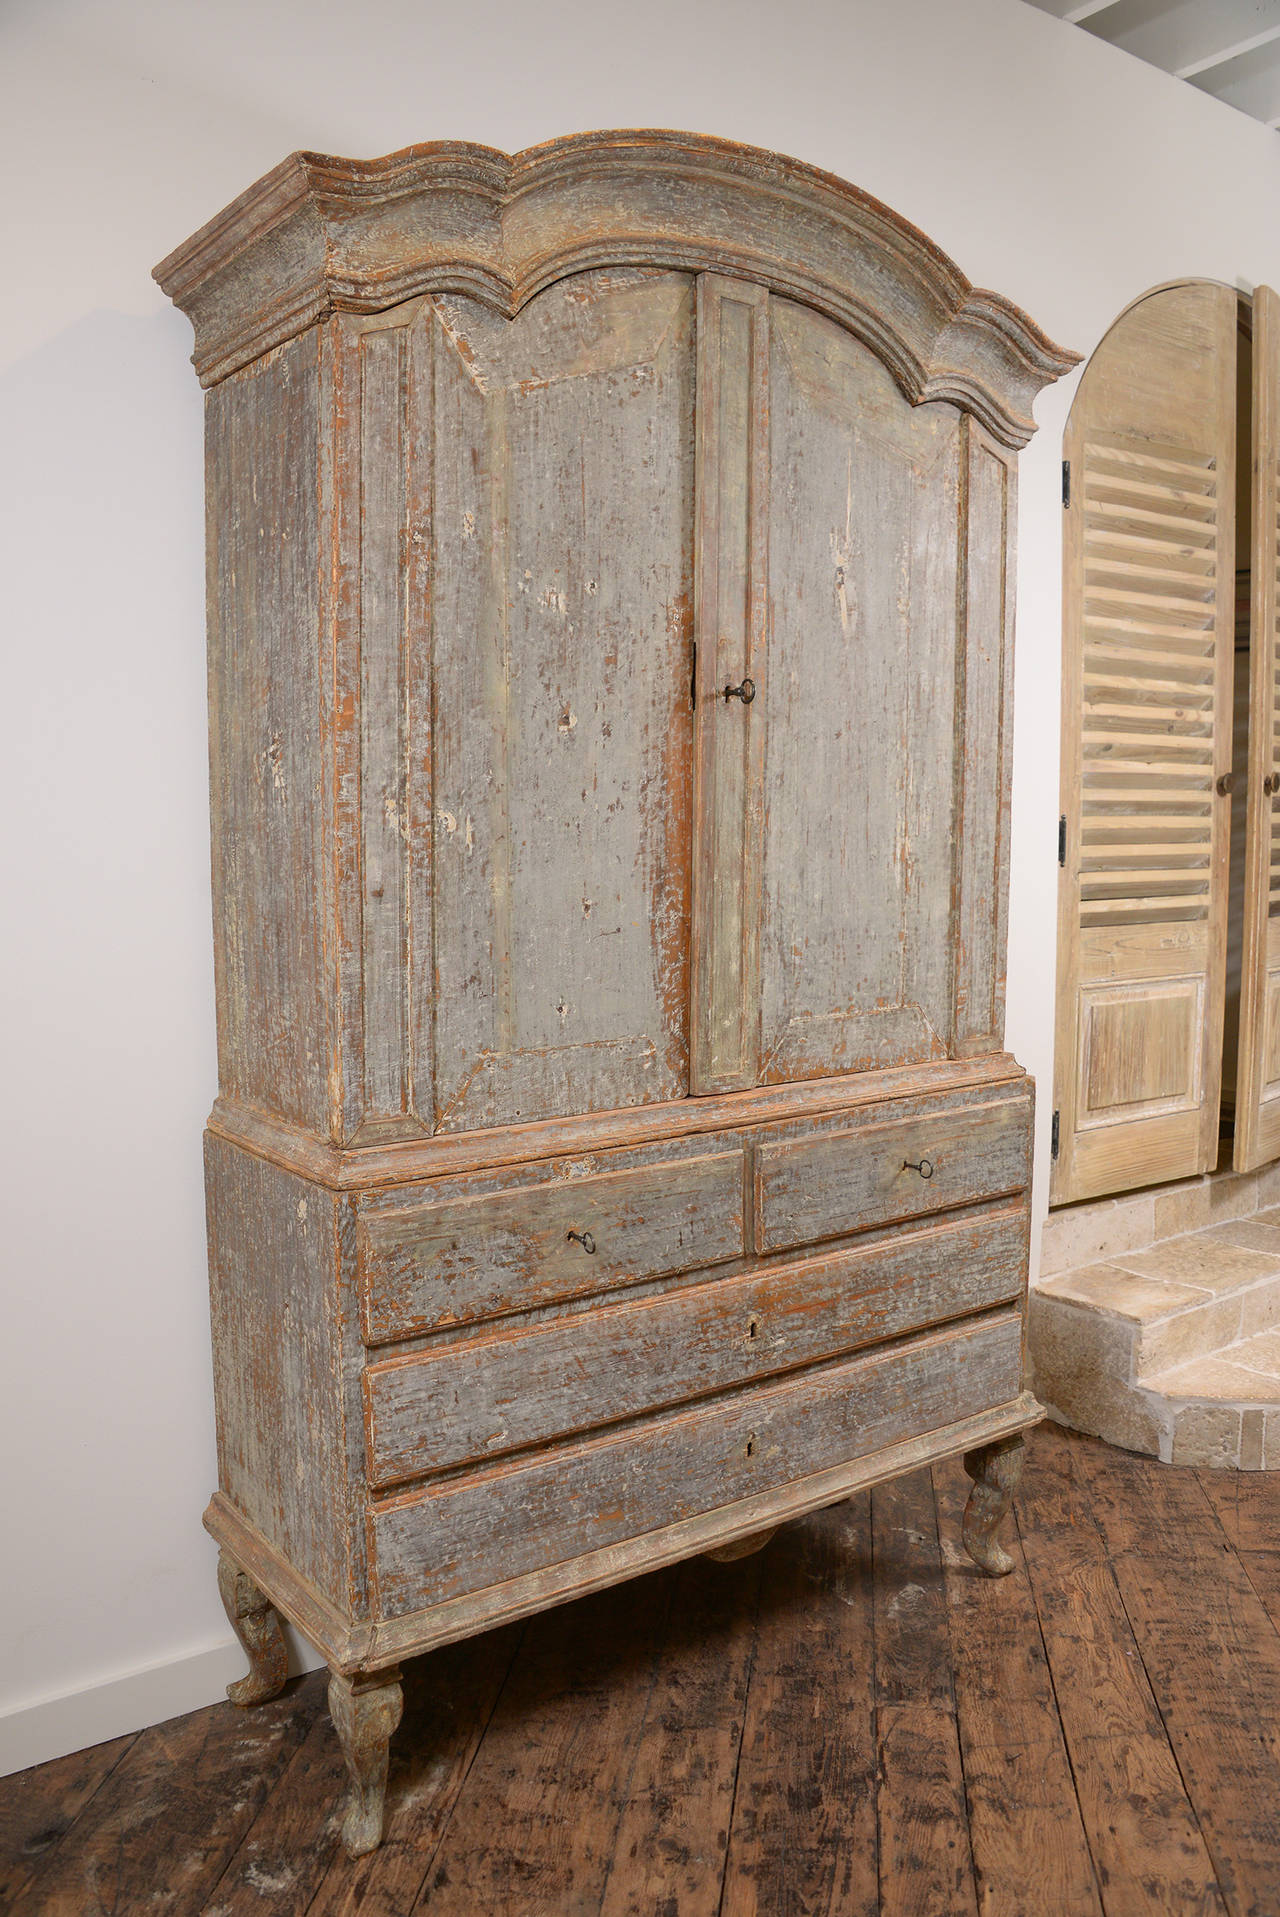 Handsome Swedish 18th century Rococo cabinet in original paint. Very elegant, elongated foot.  One of the best cabinets we have seen at M Naeve.